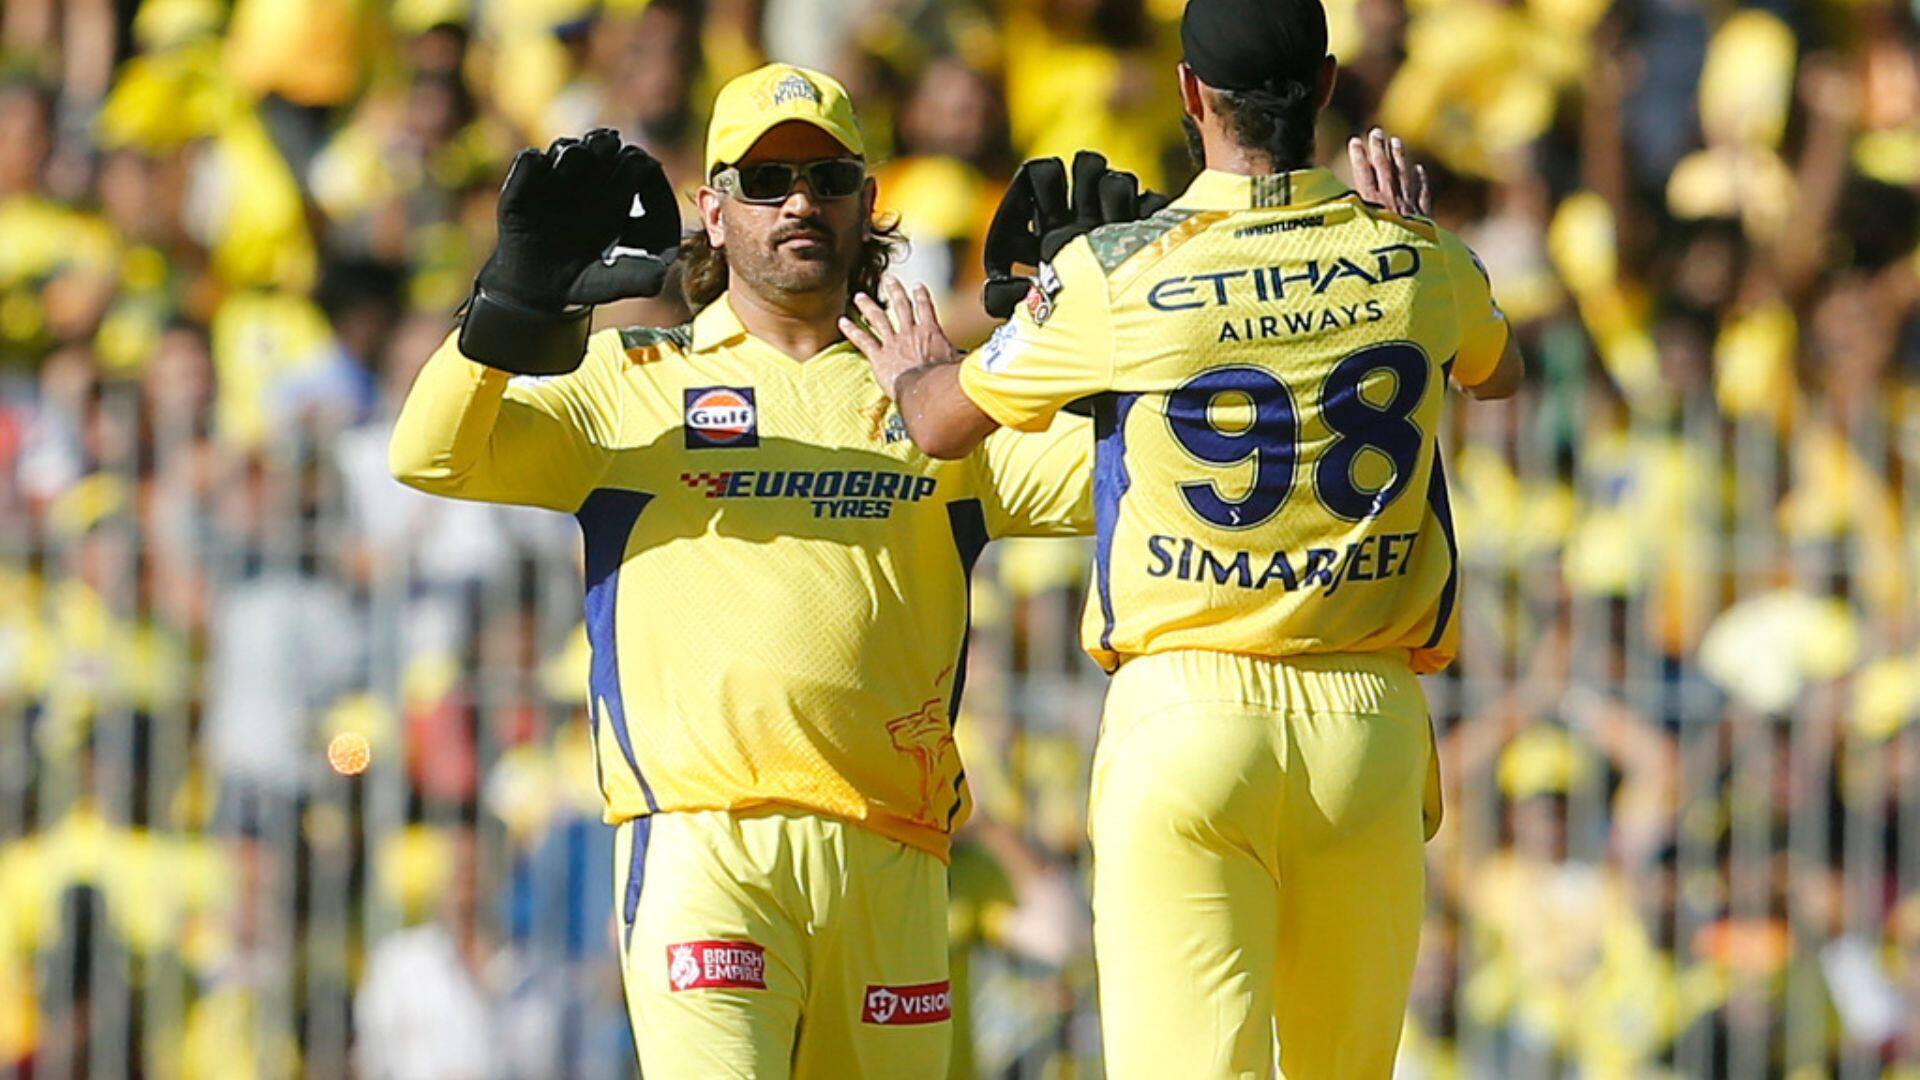 Dhoni celebrating the wicket with Simarjeet [AP]